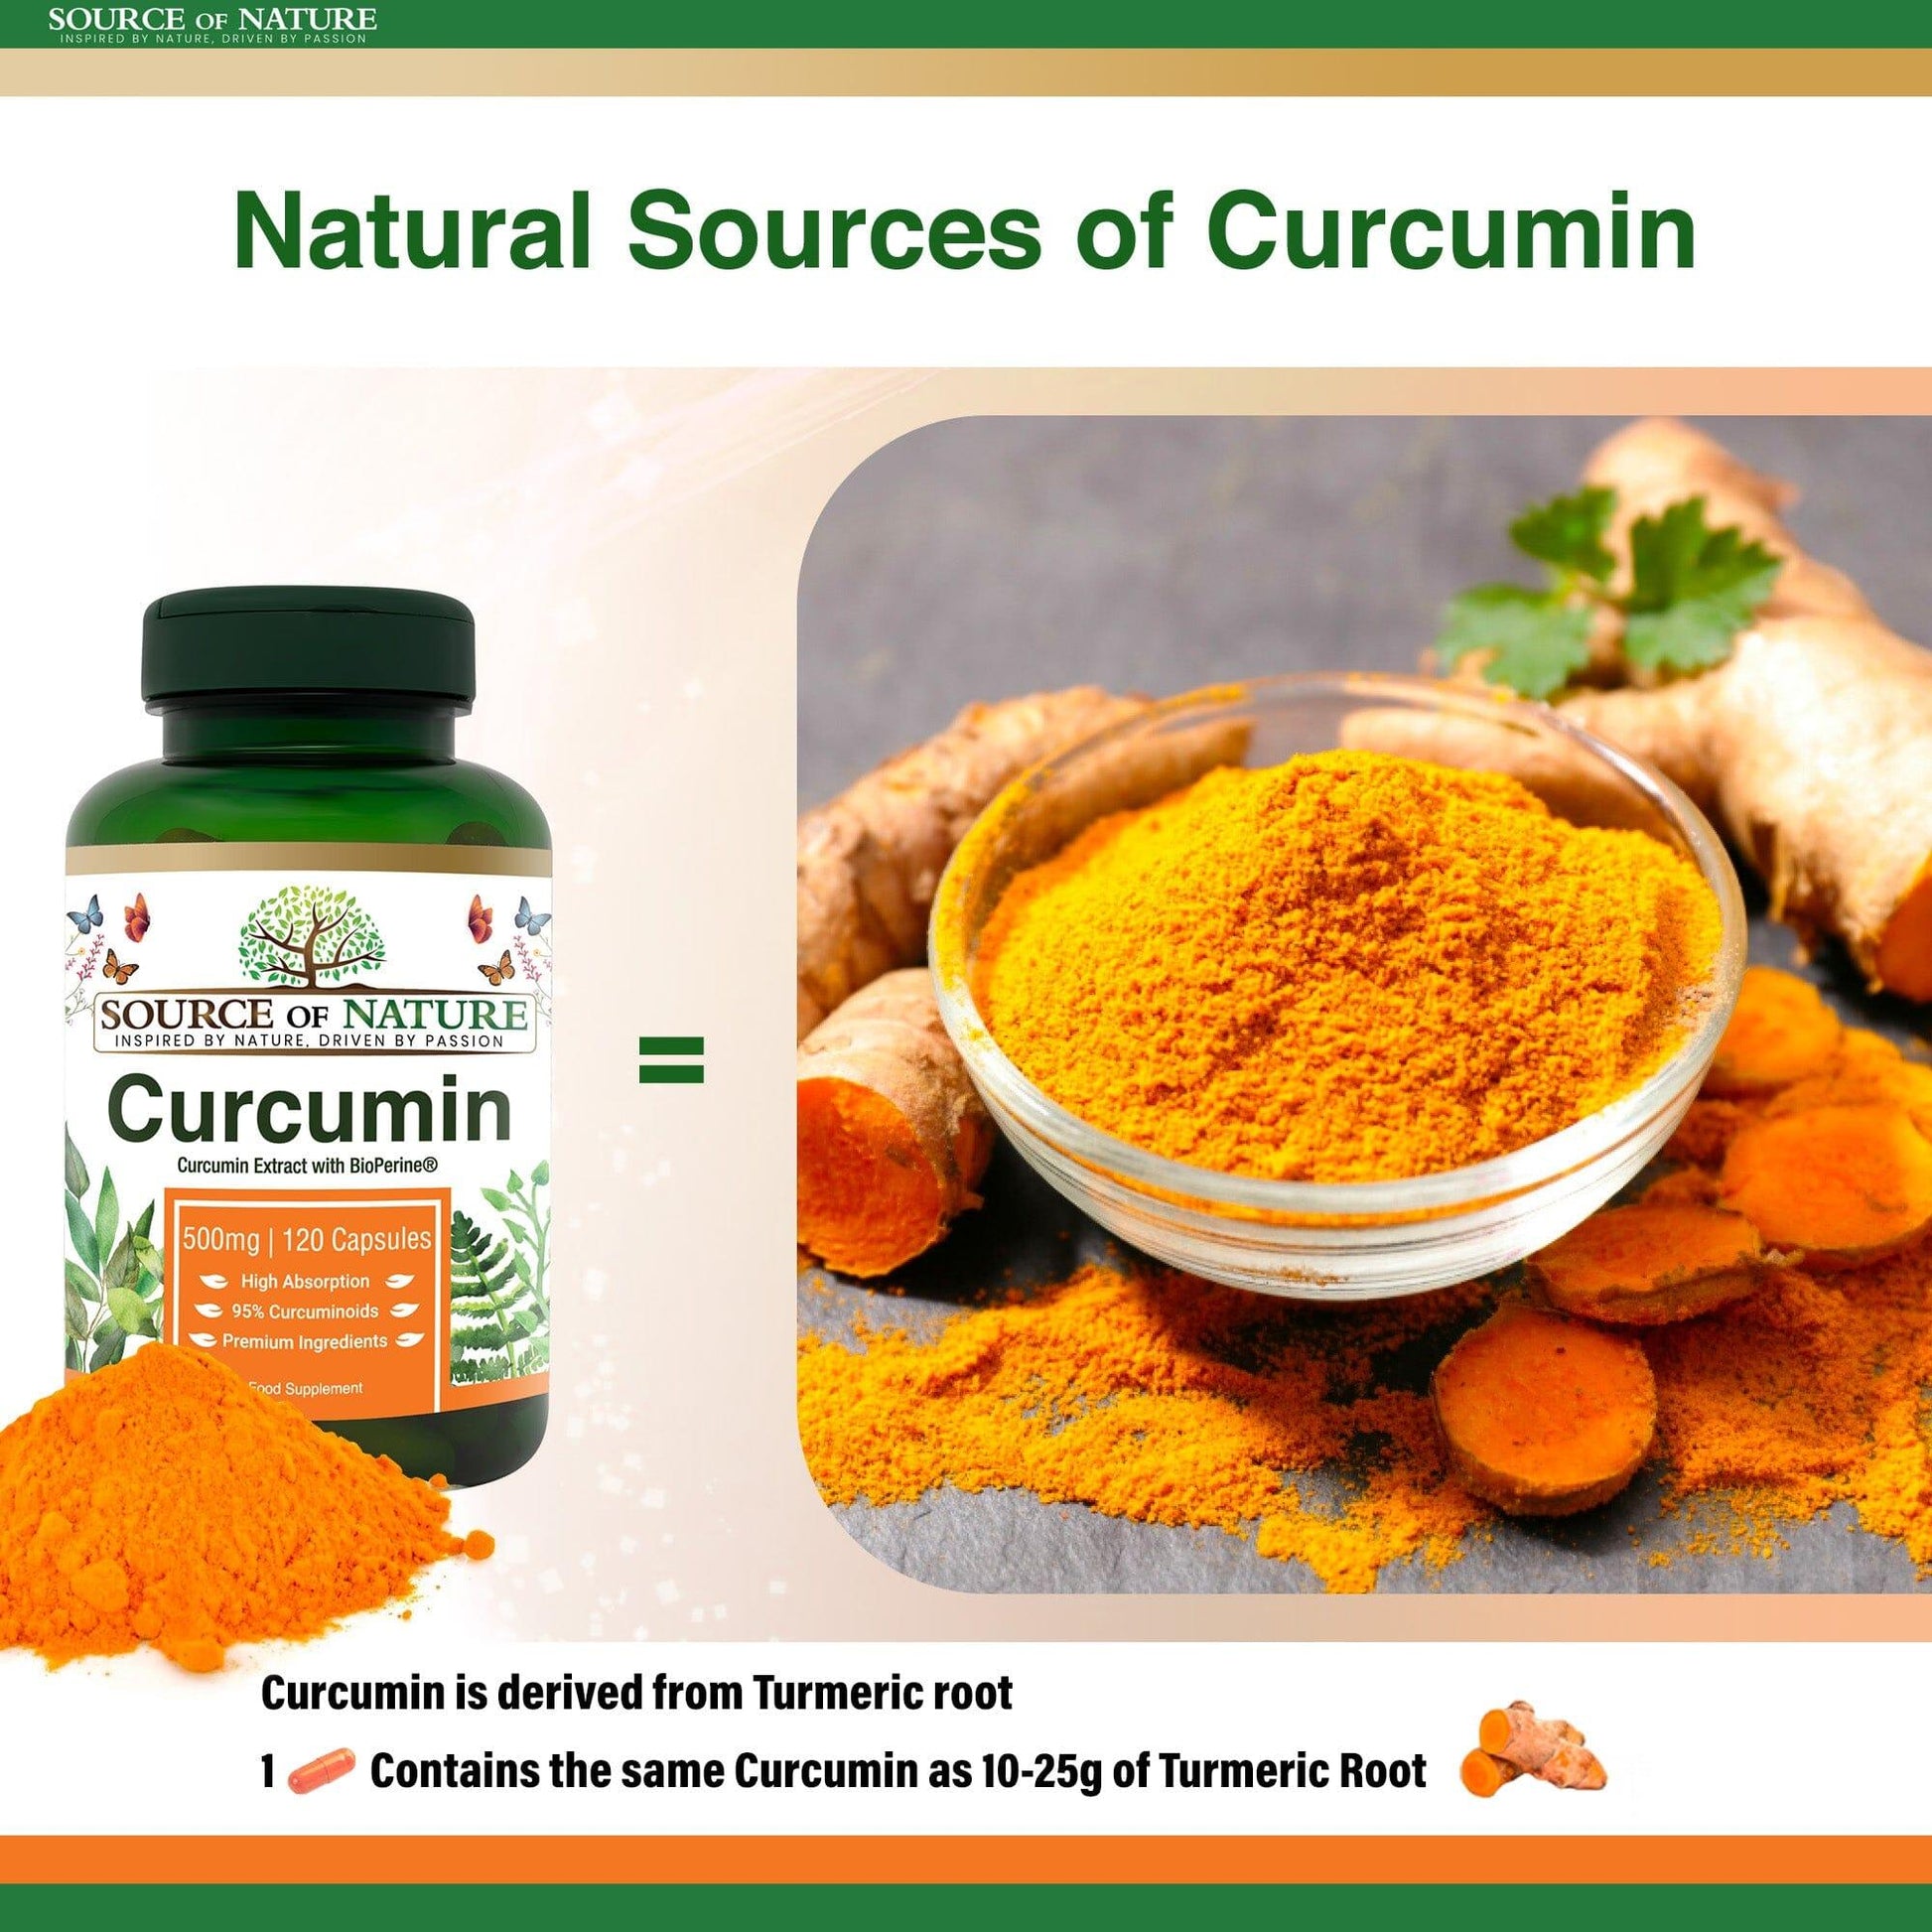 Curcumin 500mg | 120 Capsules | 4-Month Supply - Source of Nature